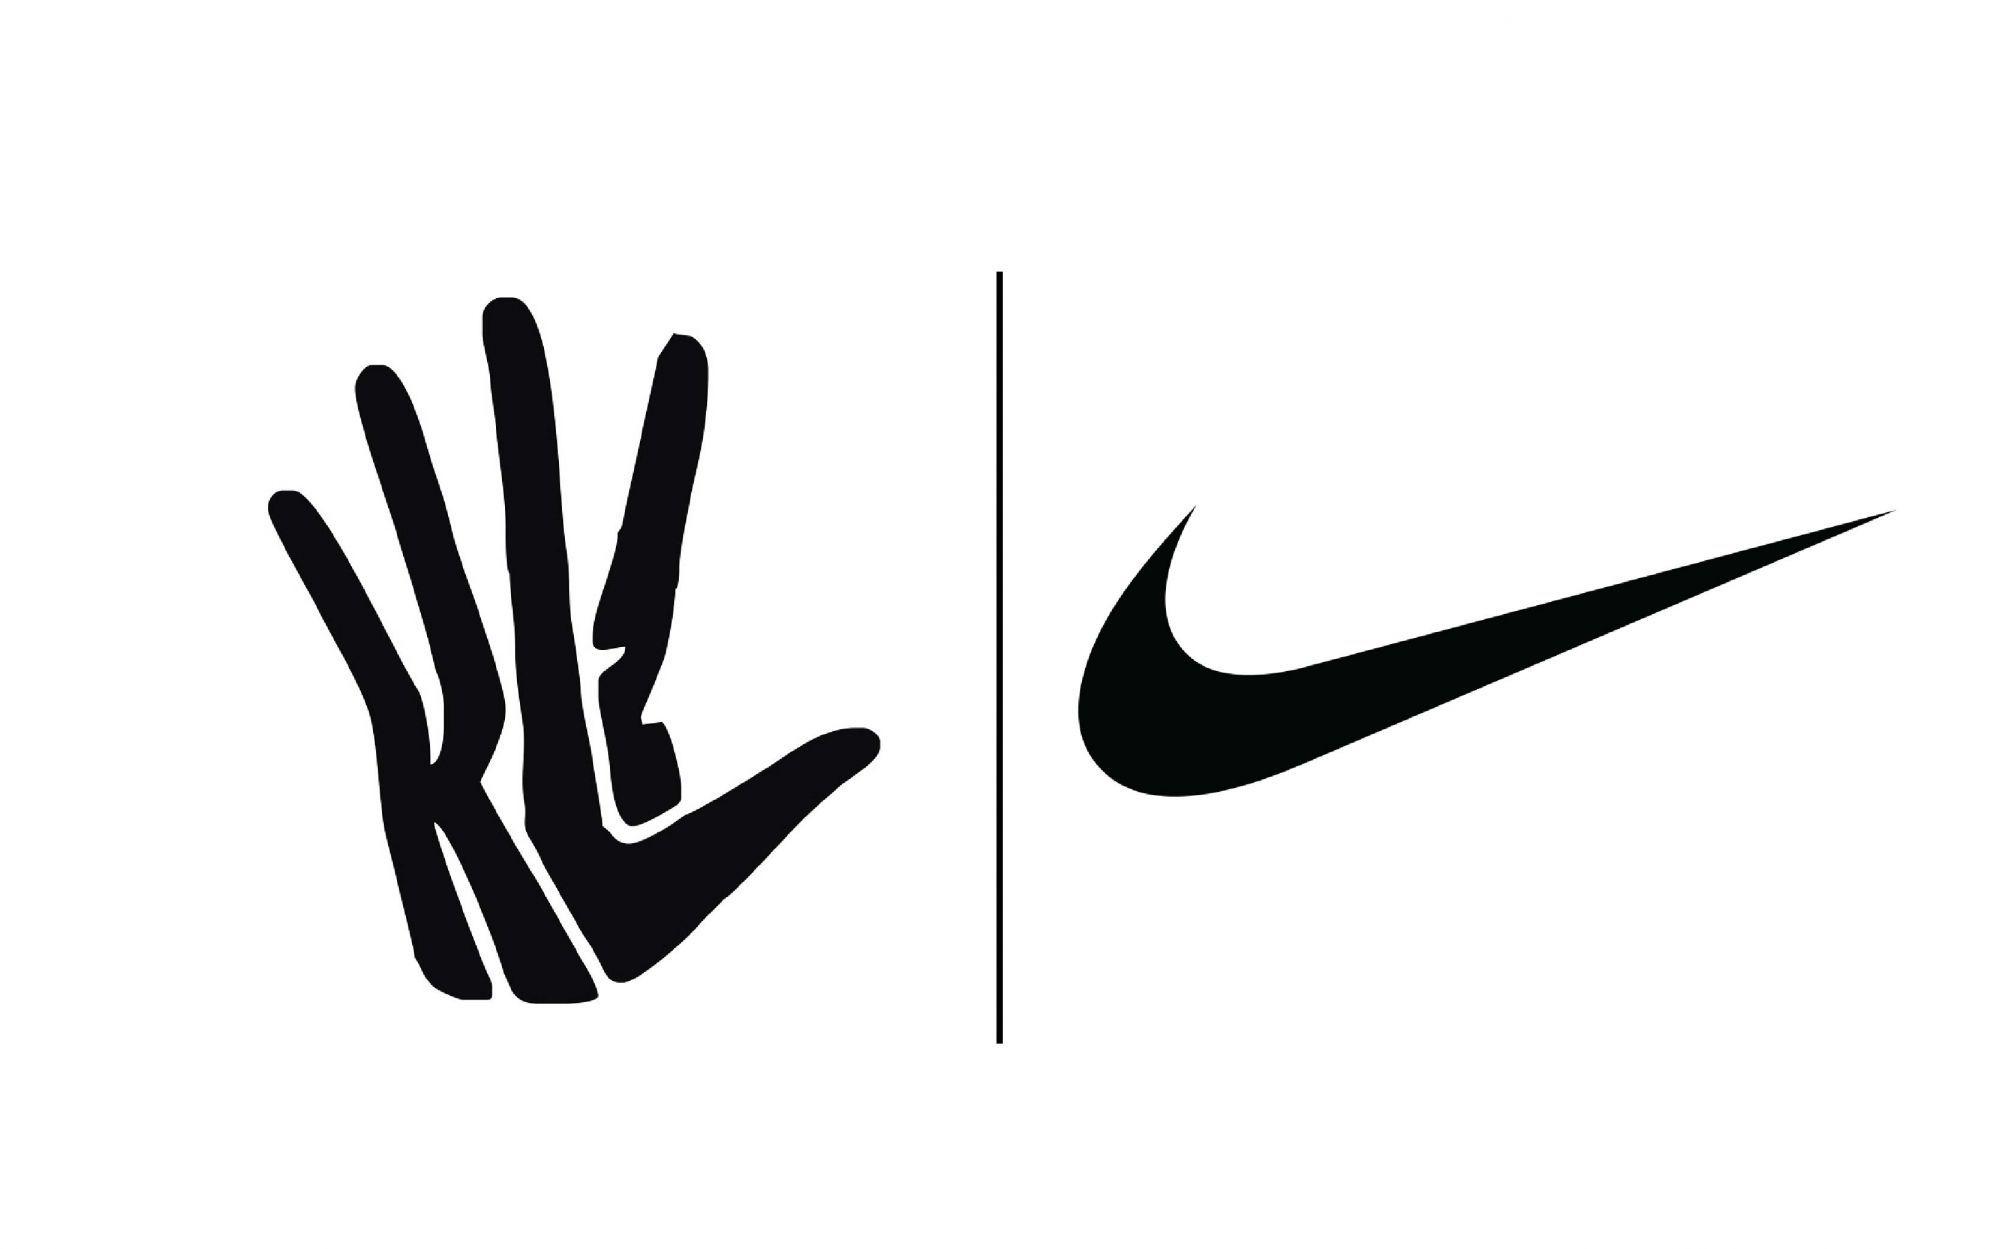 Klaw Logo - Nike filed a countersuit against Kawhi Leonard over the disputed logo